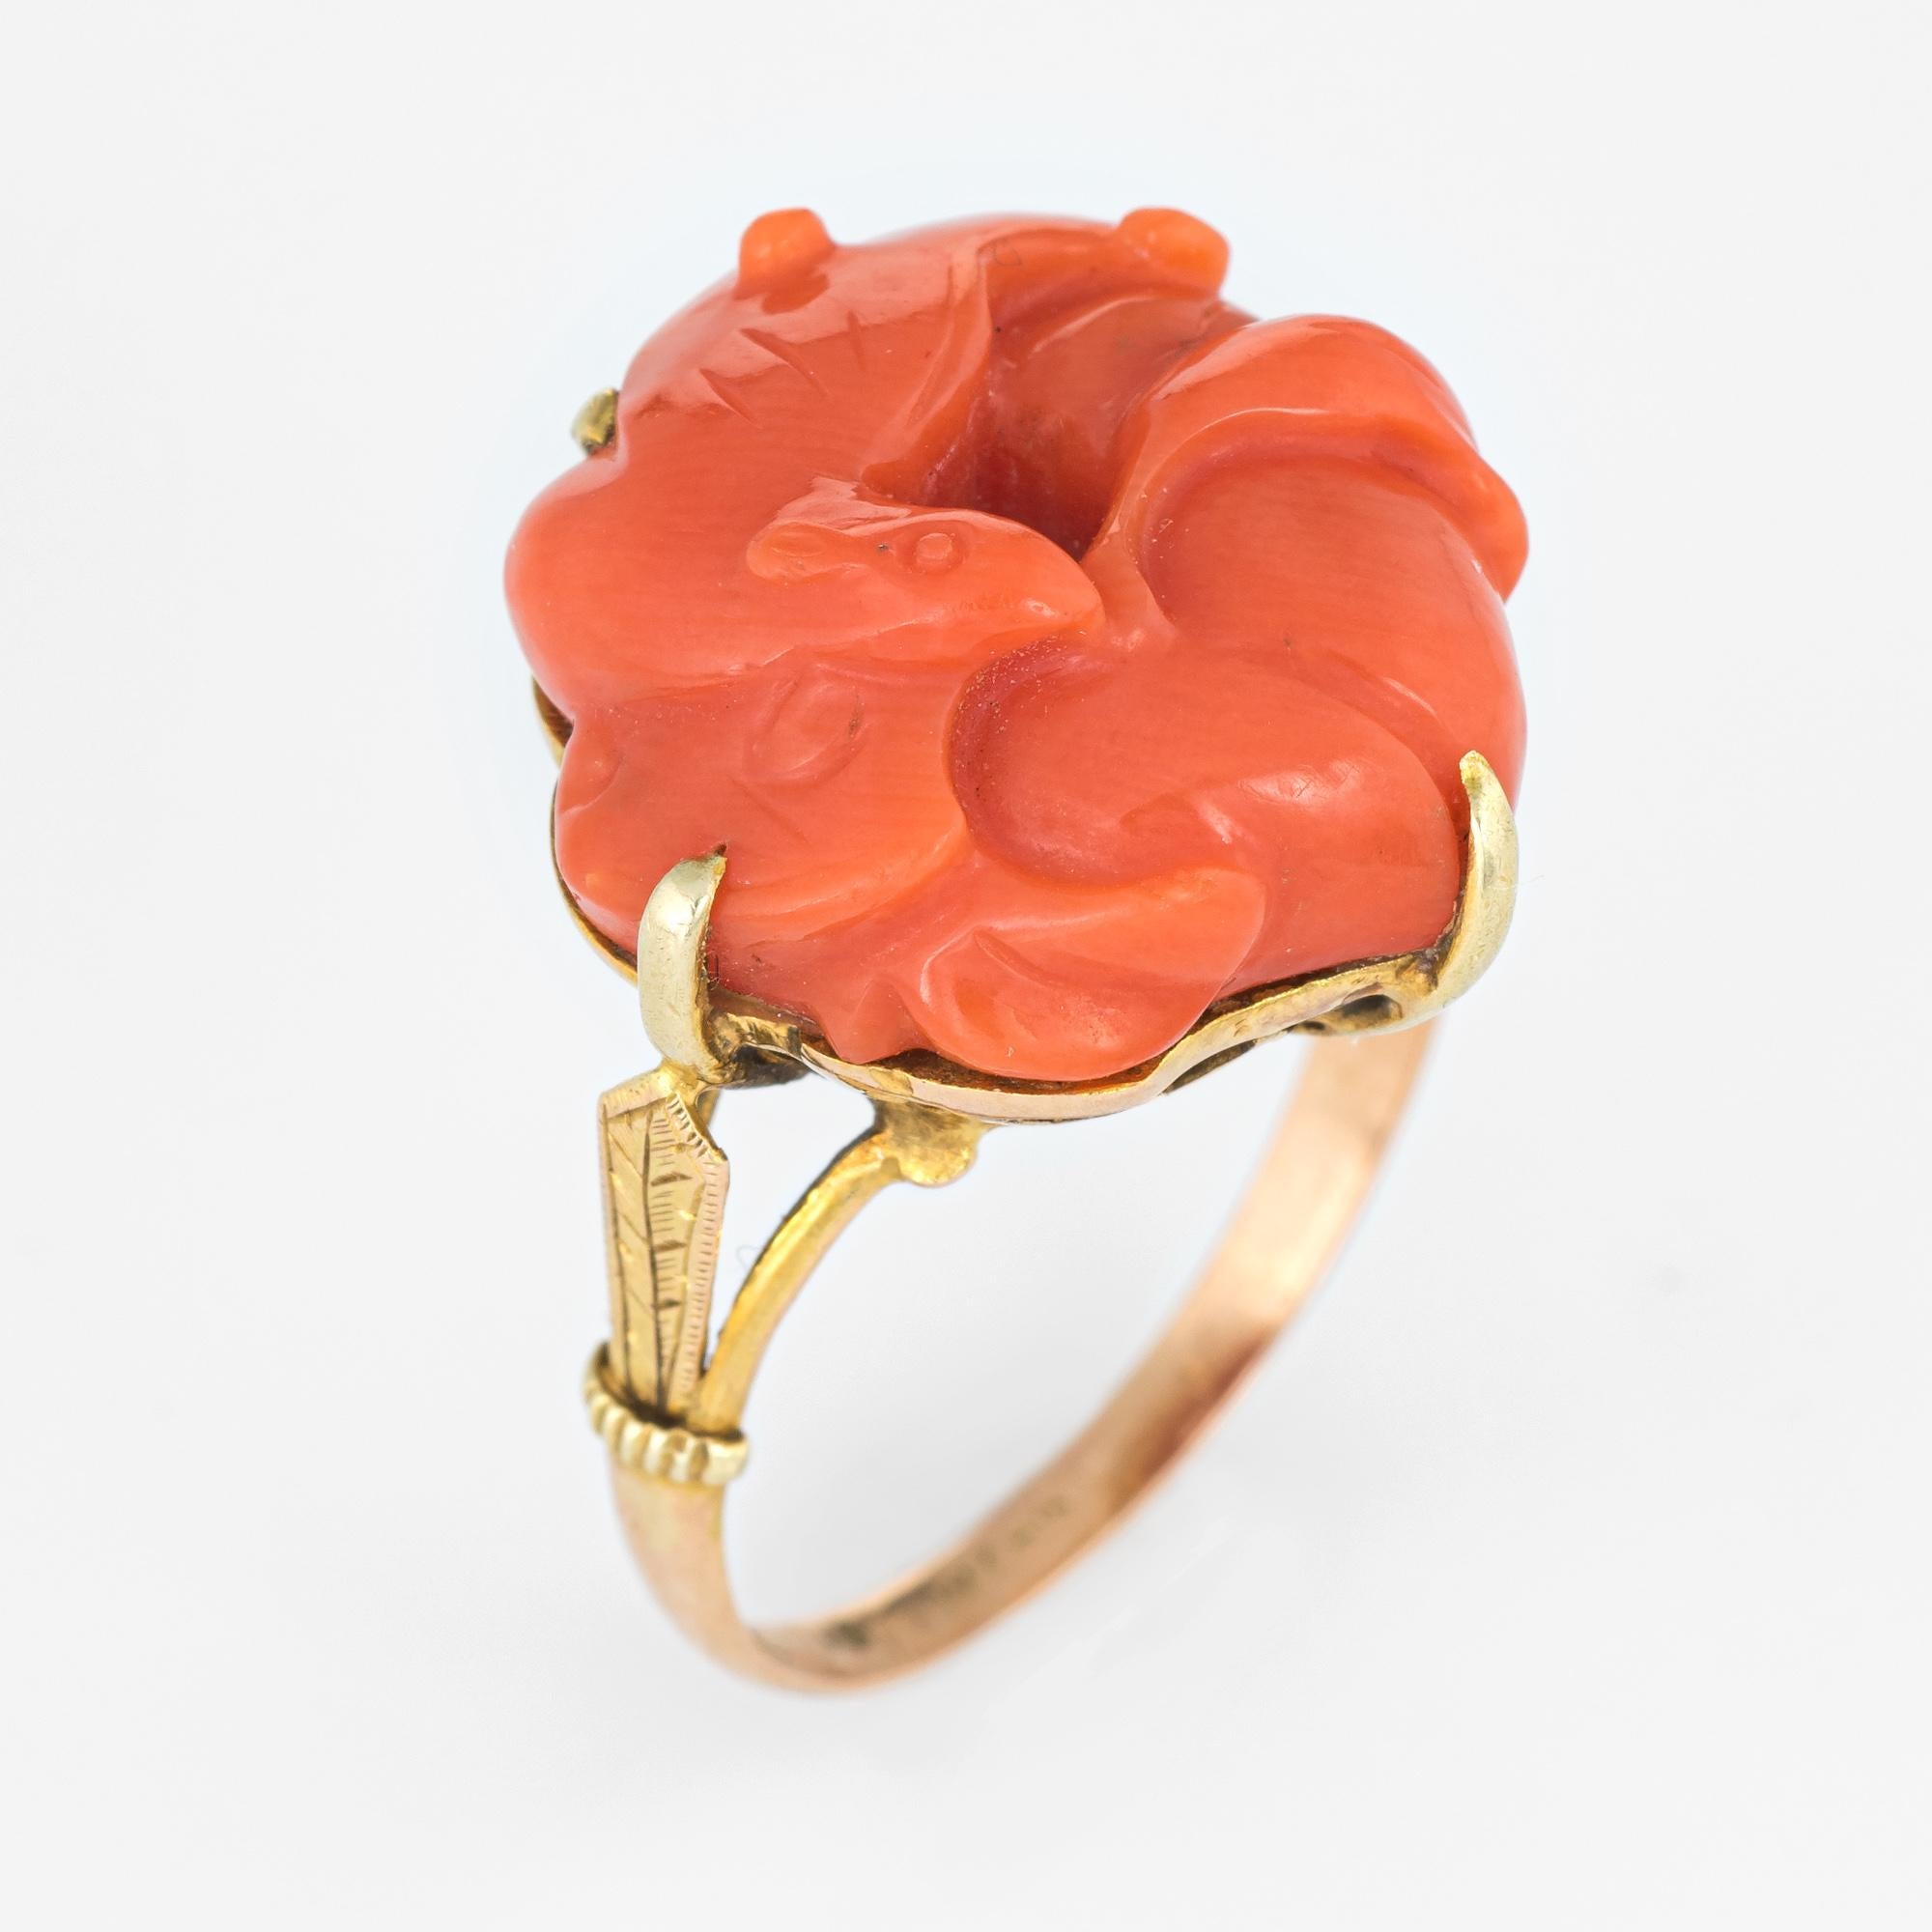 Stylish vintage carved coral ring (circa 1950s to 1960s) crafted in 14 karat yellow gold. 

Carved coral measures 16mm (in excellent condition and free of cracks or chips). The coral is set securely in a four pronged mount. 

The coral is carved in